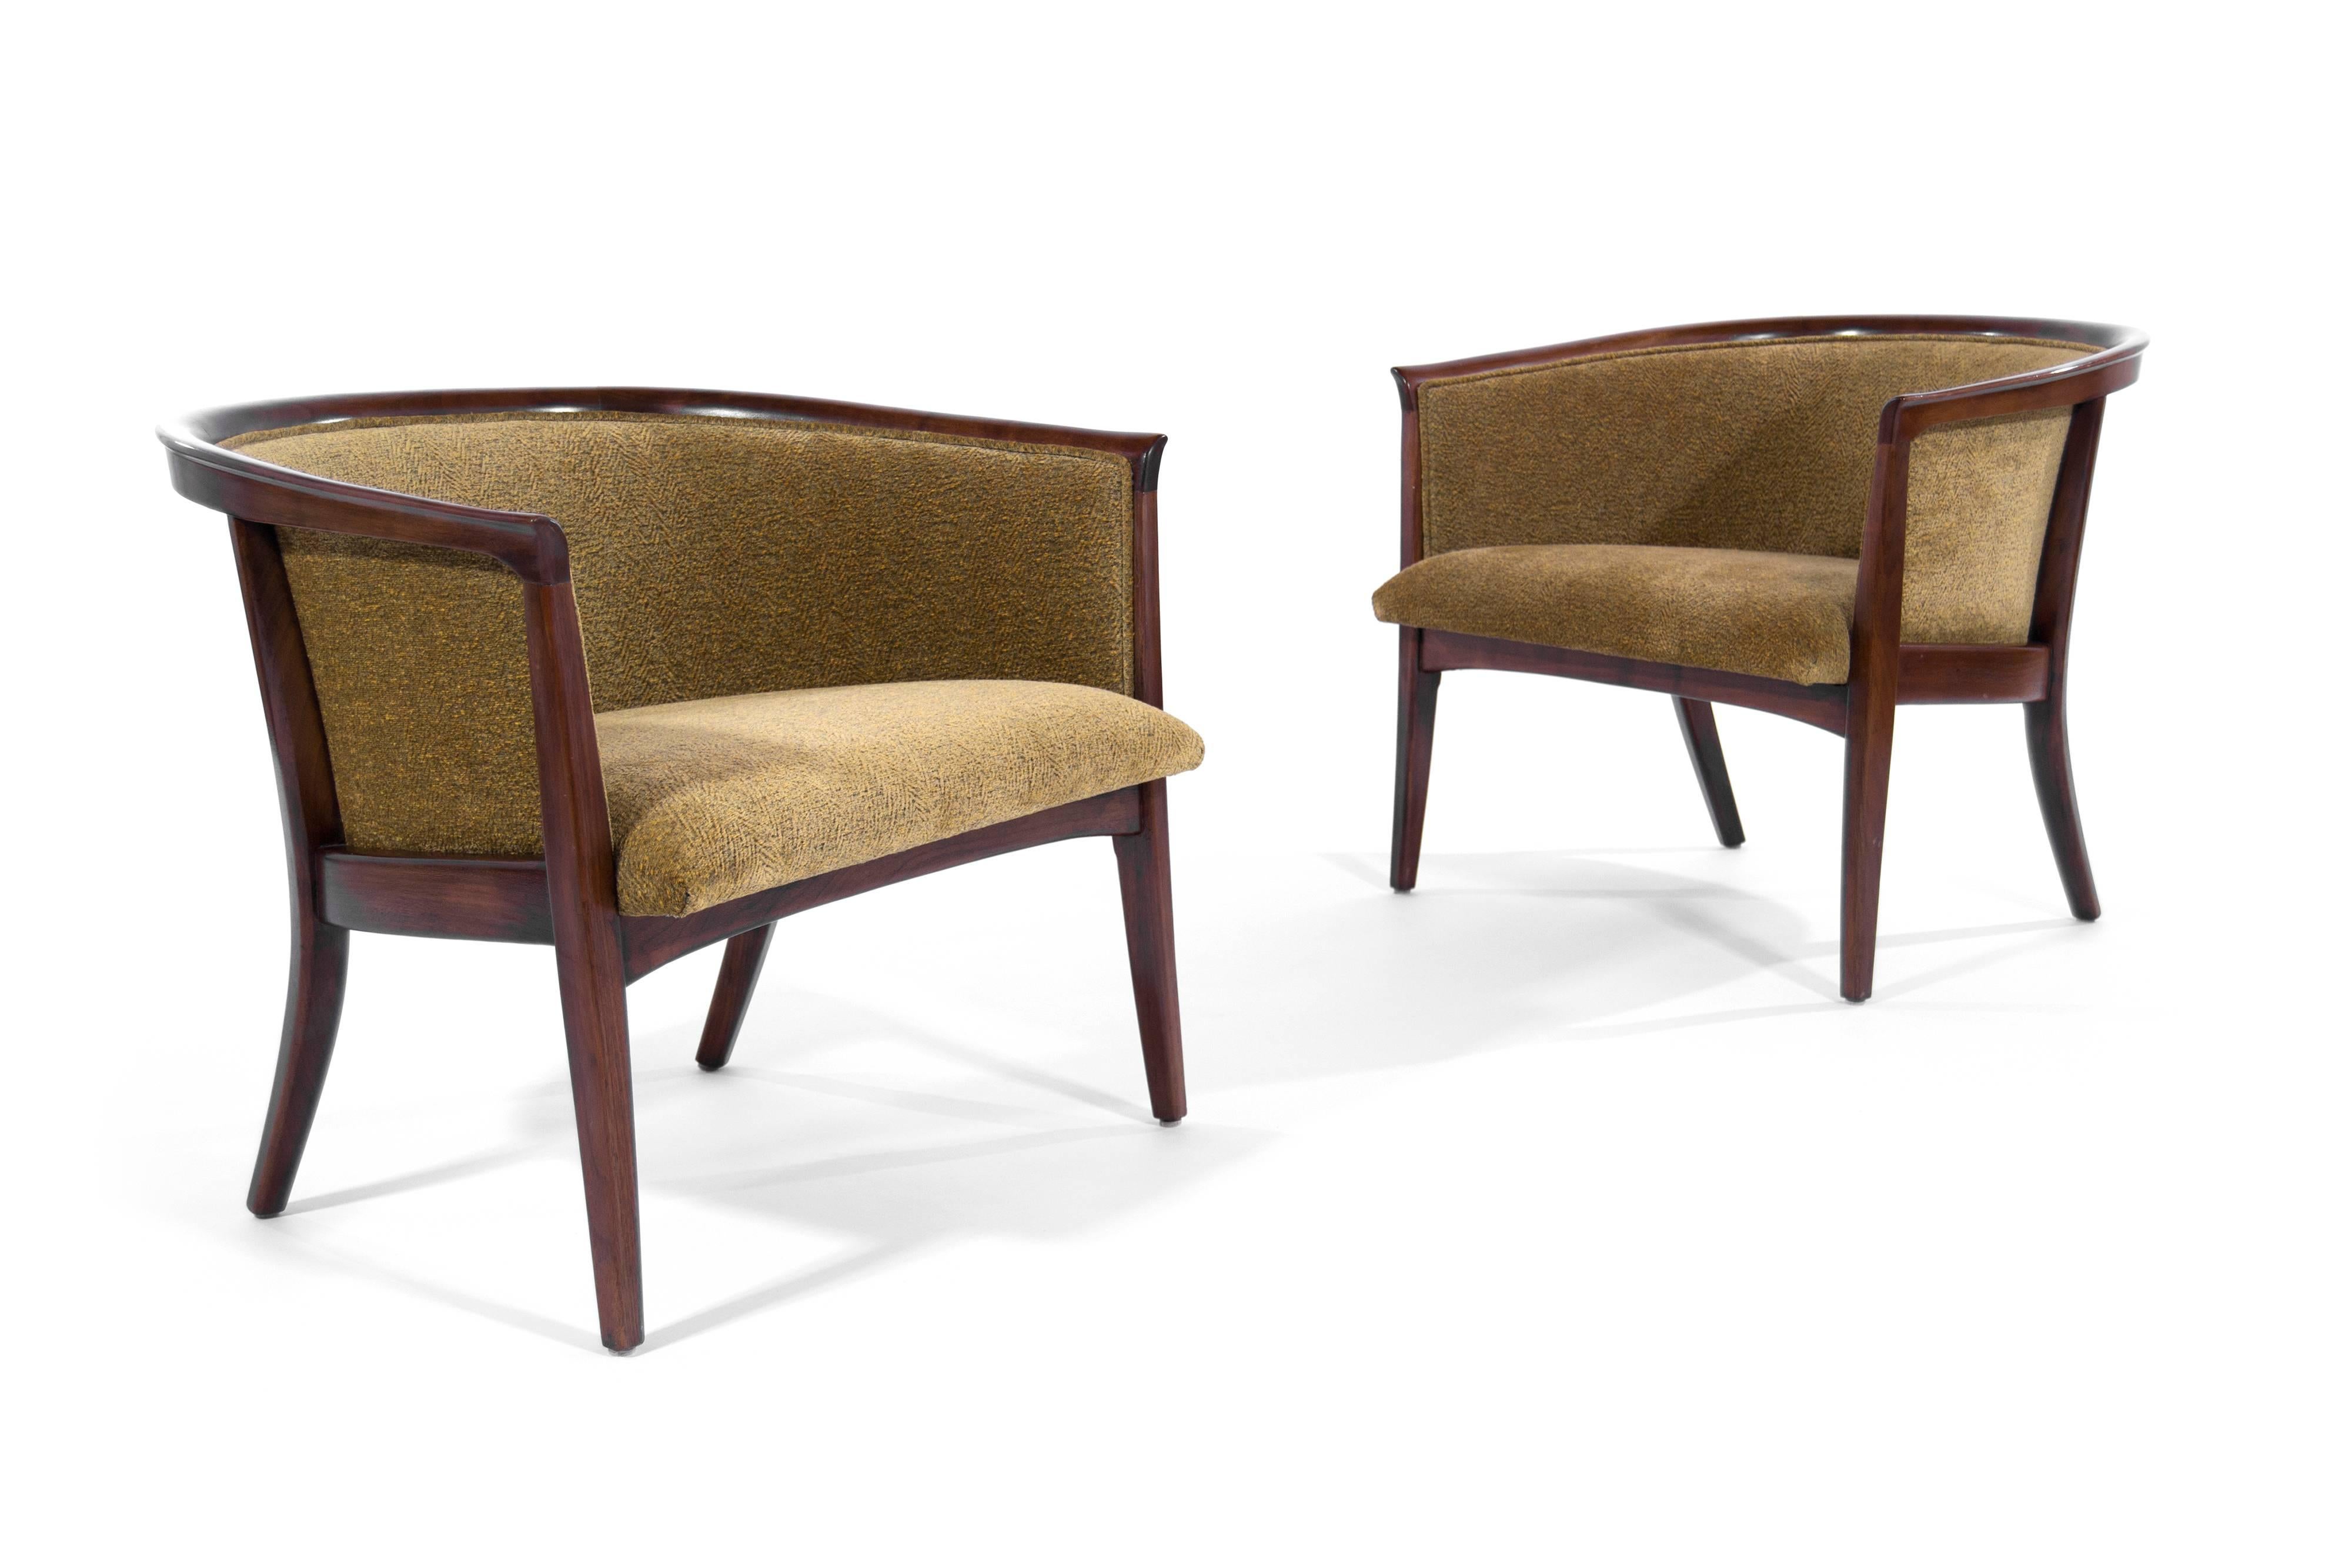 Stunning pair of low profile lounge chairs designed by Milo Baughman for Thayer Coggin, circa 1950s.

Walnut frames fully restored, newly upholstered in chenille.